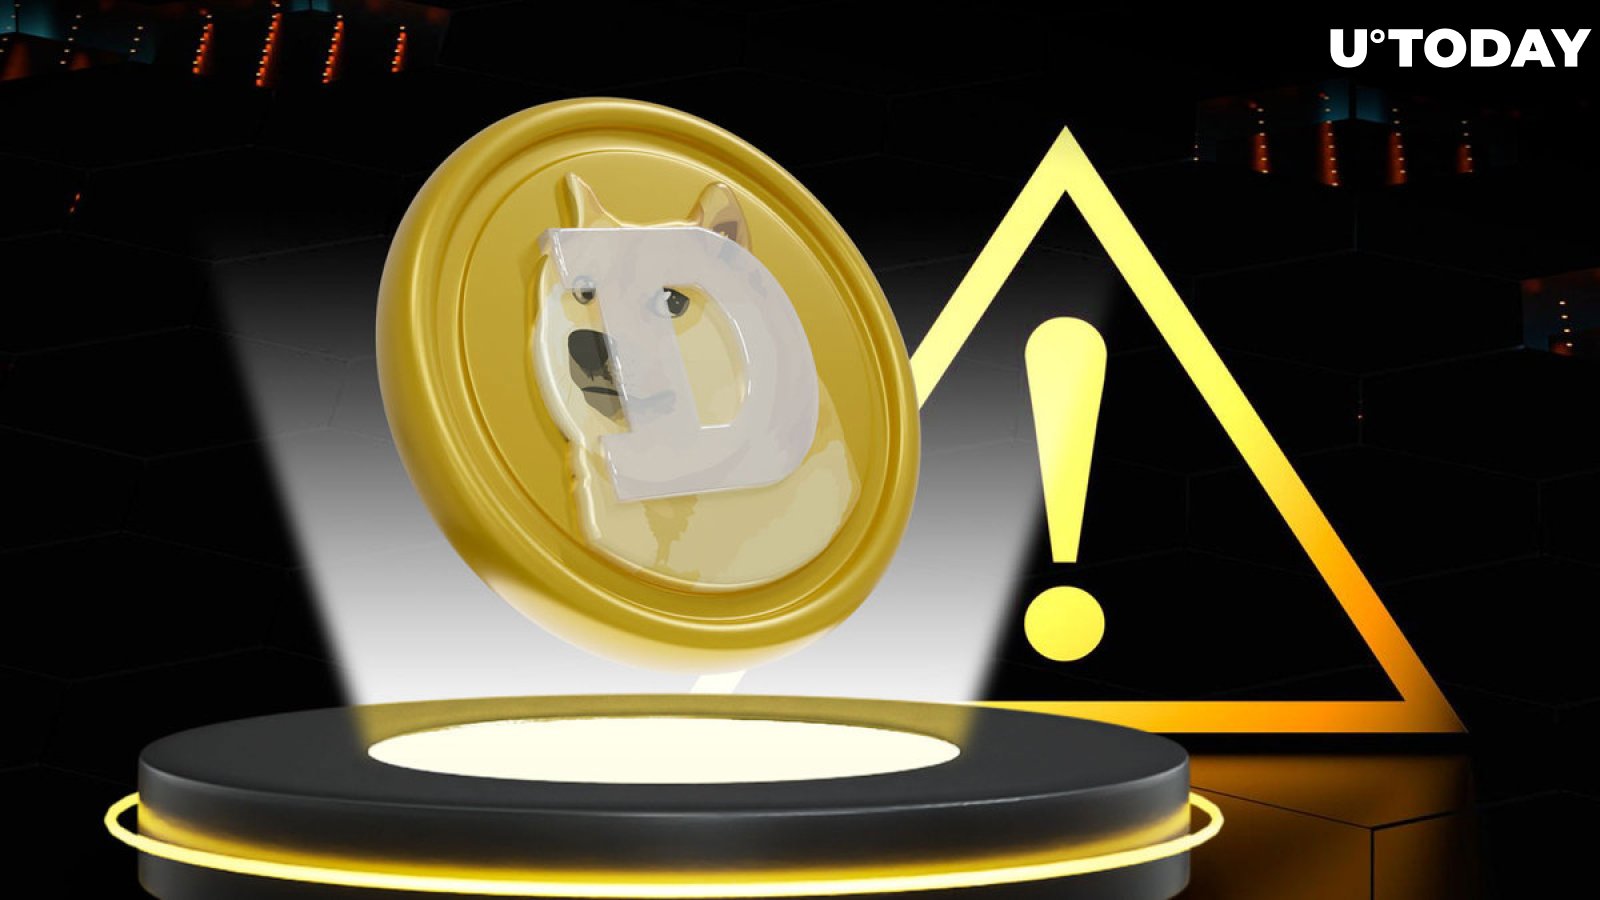 The Dogecoin (DOGE) community receives a warning, what does it mean?